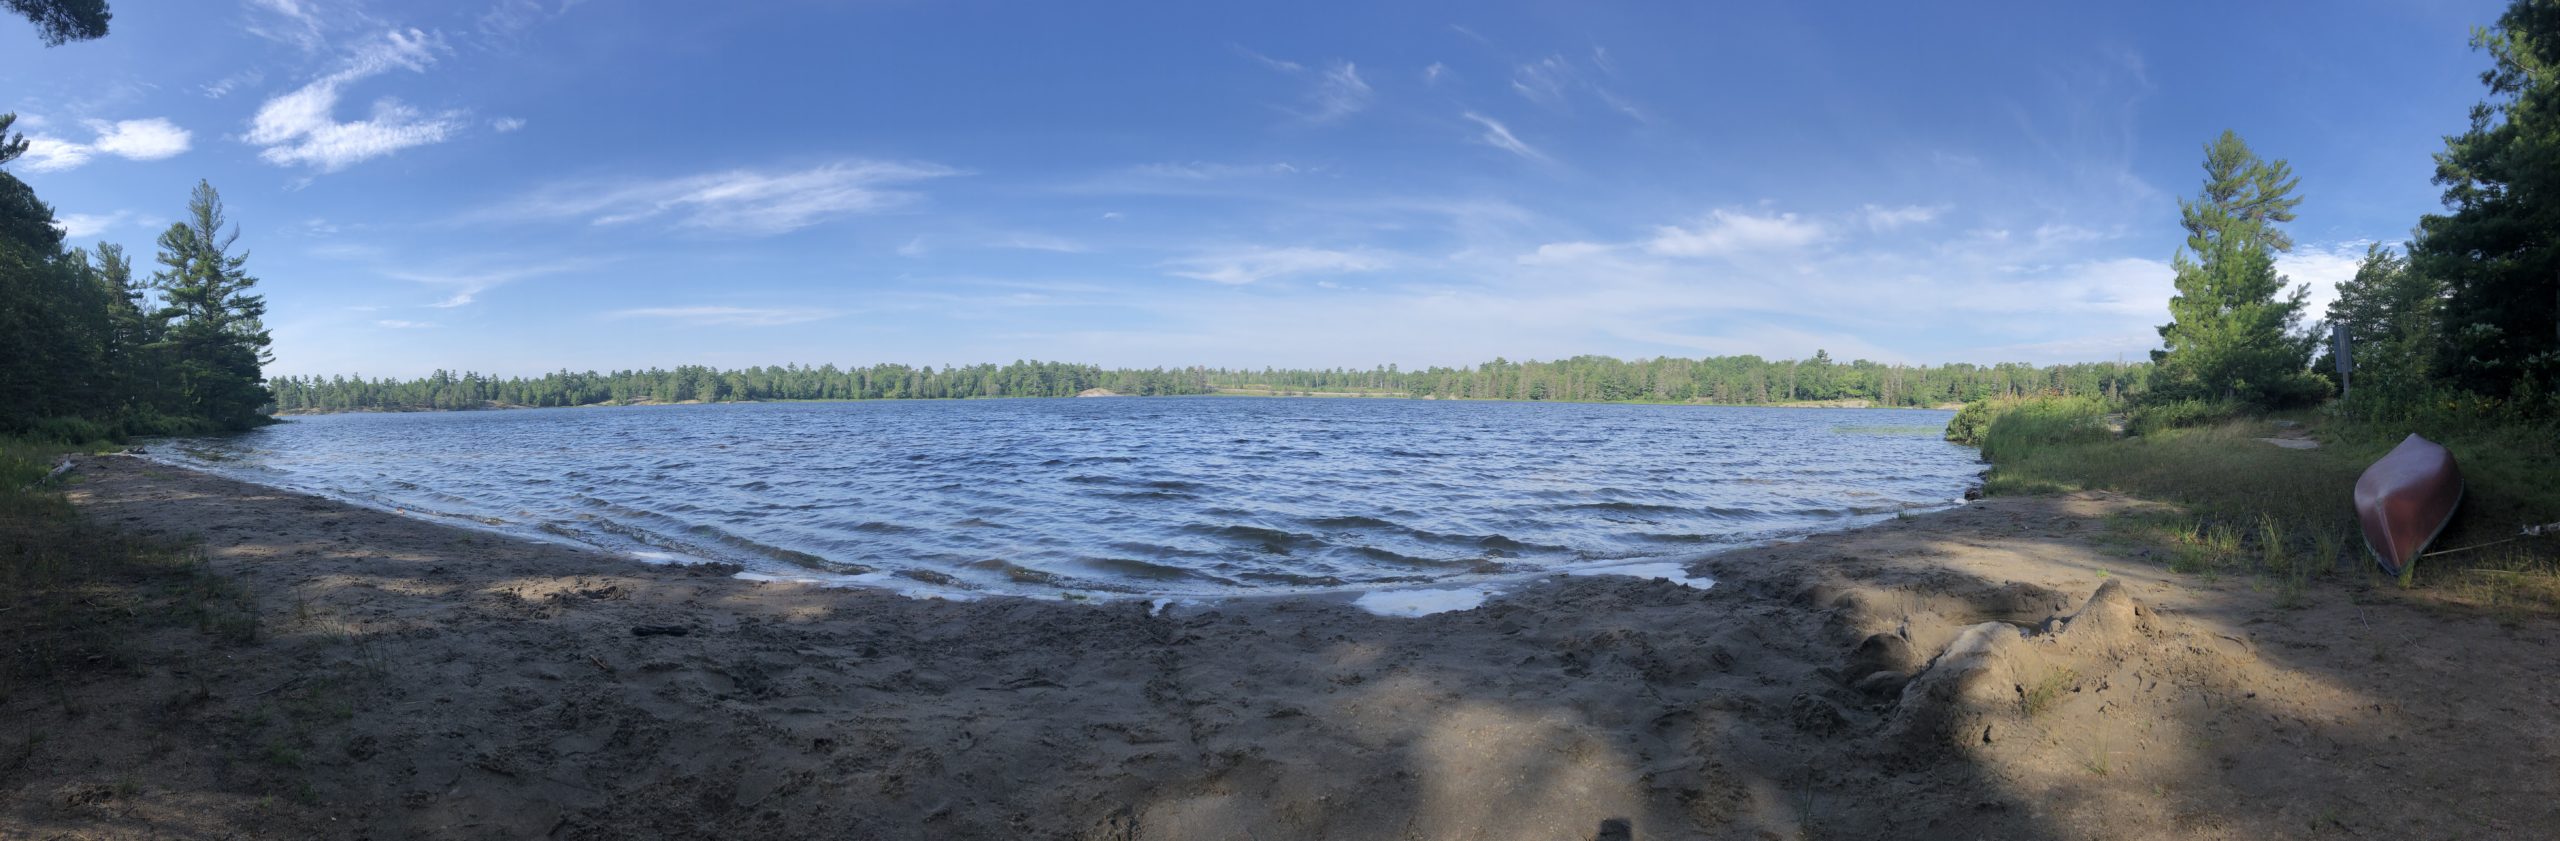 Panorama of Clear Lake Beach at Grundy Provincial Park